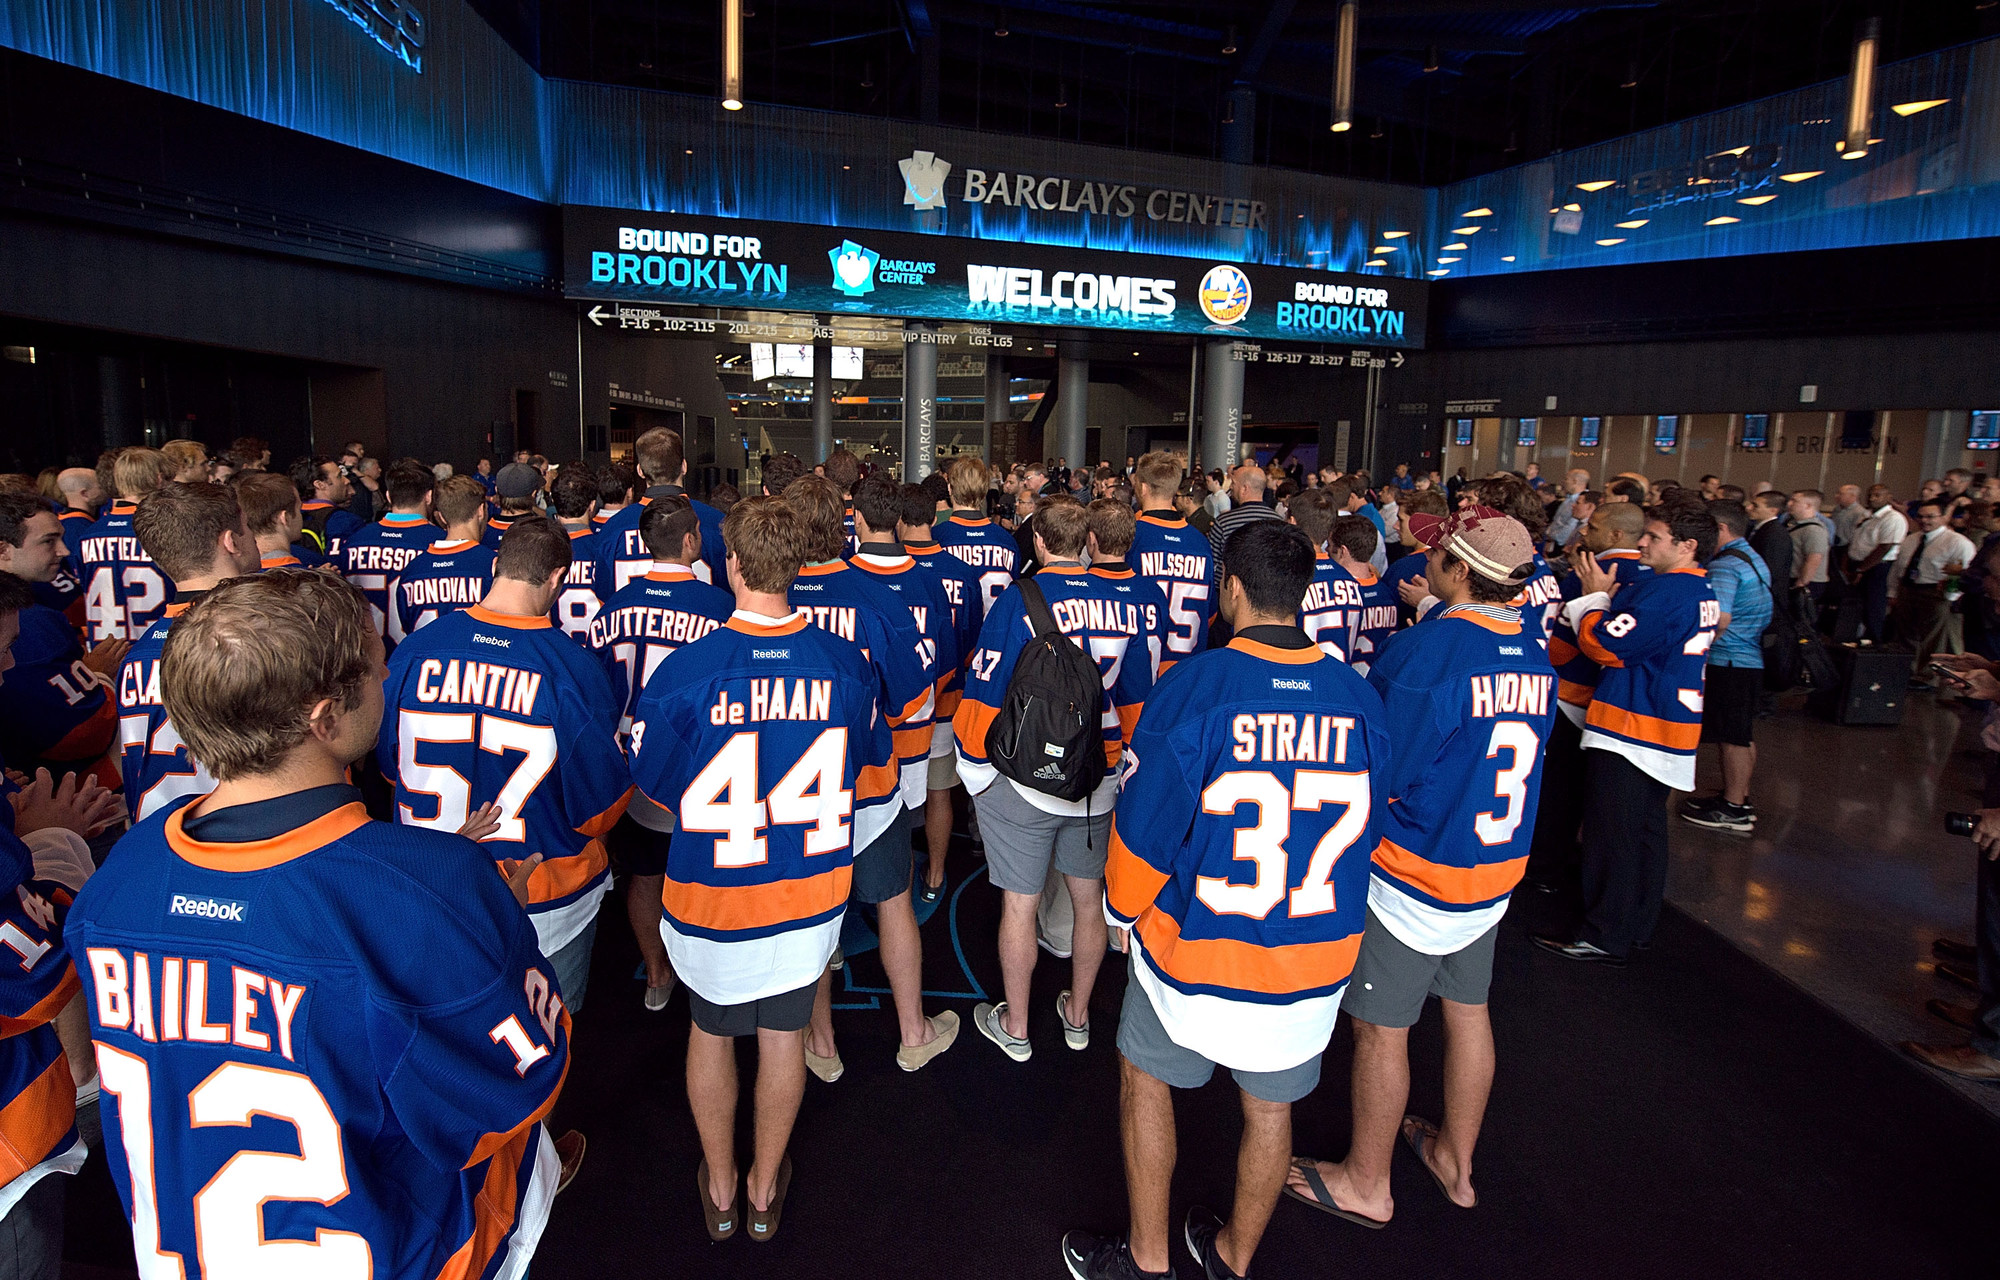 Islanders players entered their future home arena, the Barclays Center. The team will move to the arena full-time in the 2015-2016 season, after playing its home games in Uniondale's Nassau Coliseum for more than 40 years